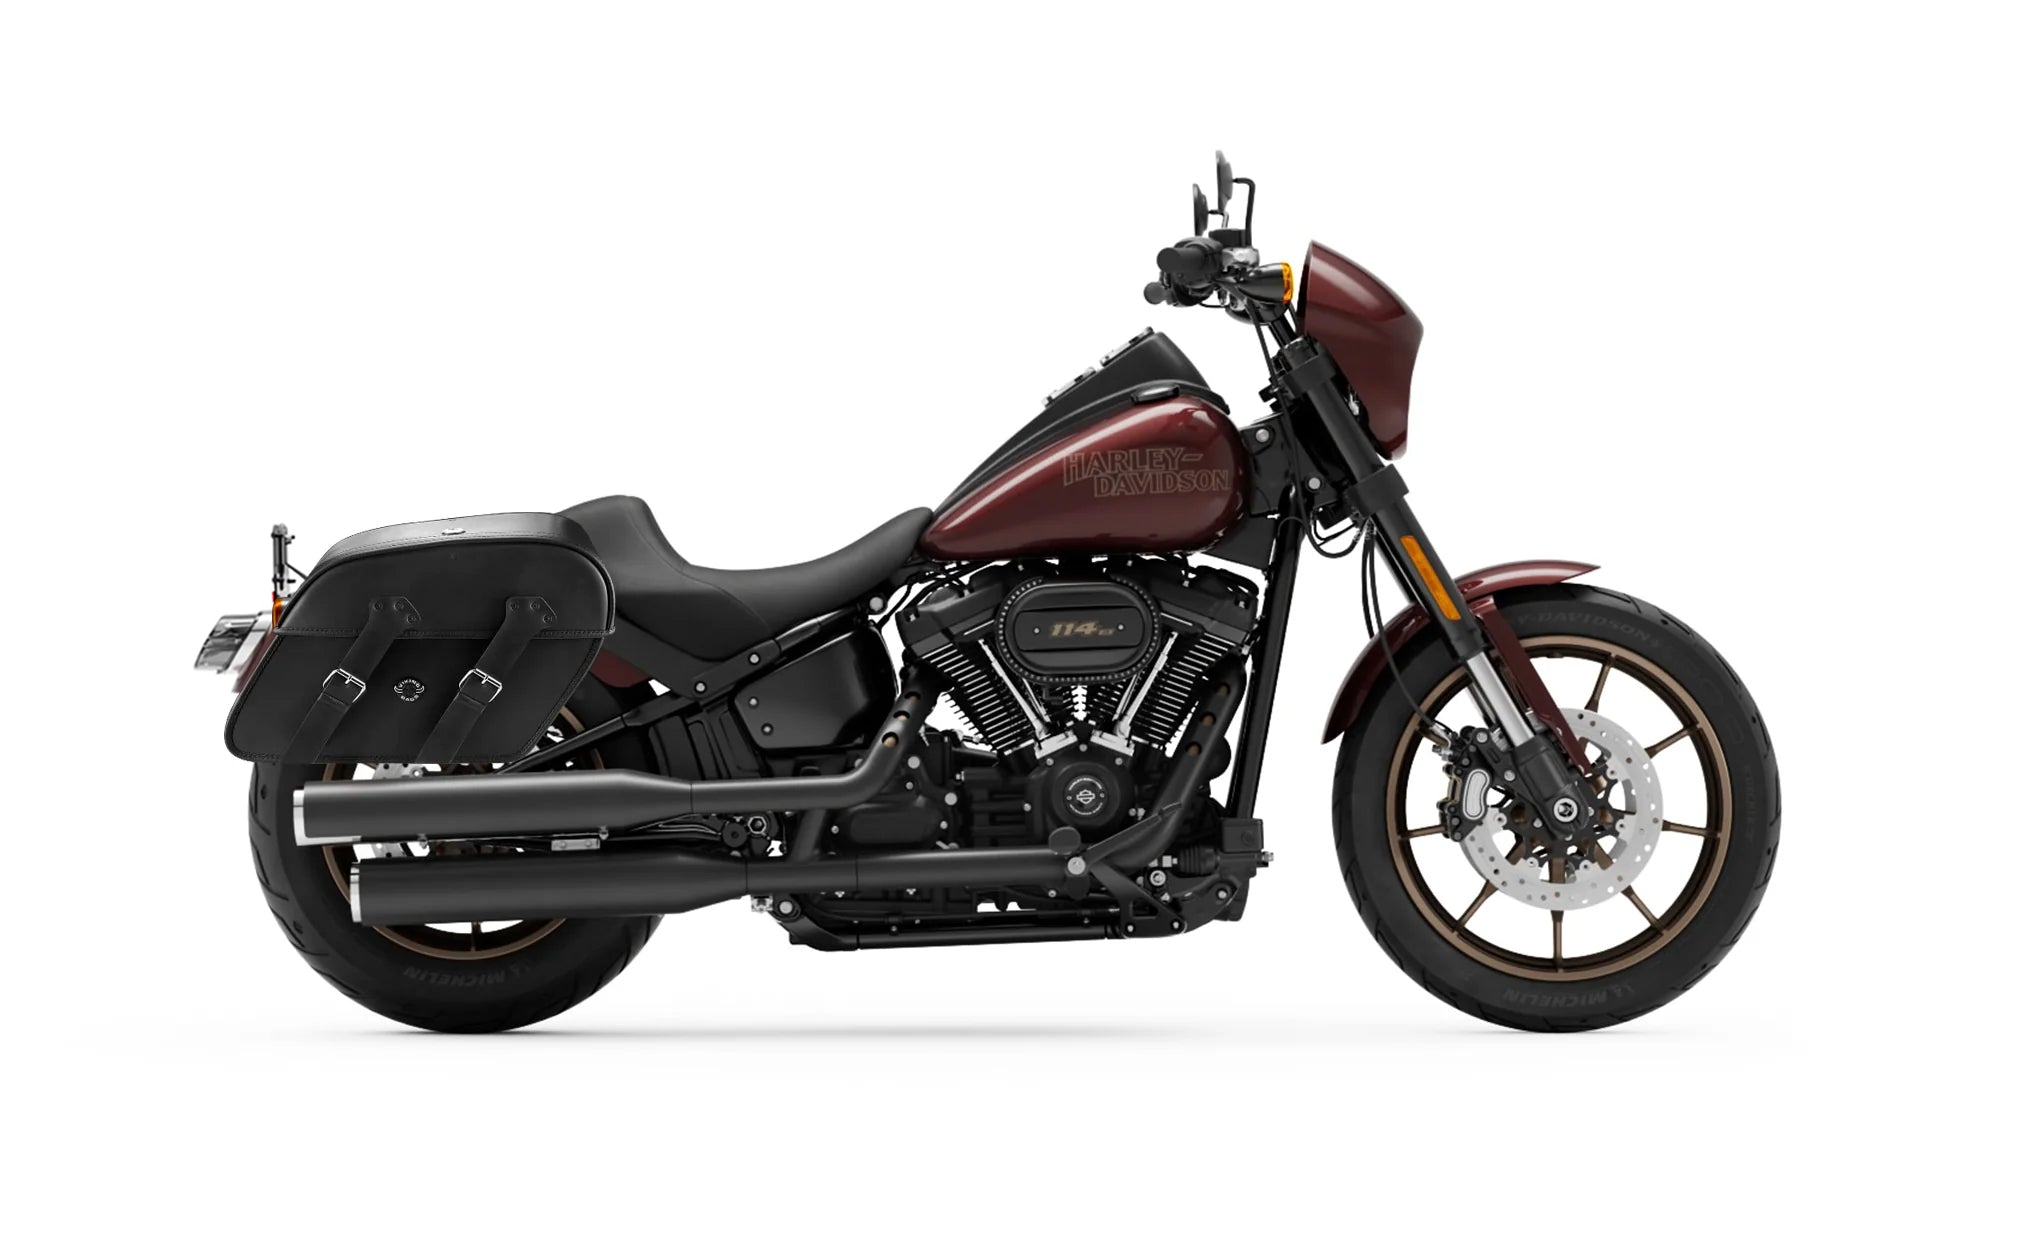 Viking Raven Extra Large Leather Motorcycle Saddlebags For Harley Softail Low Rider S Fxlrs on Bike Photo @expand